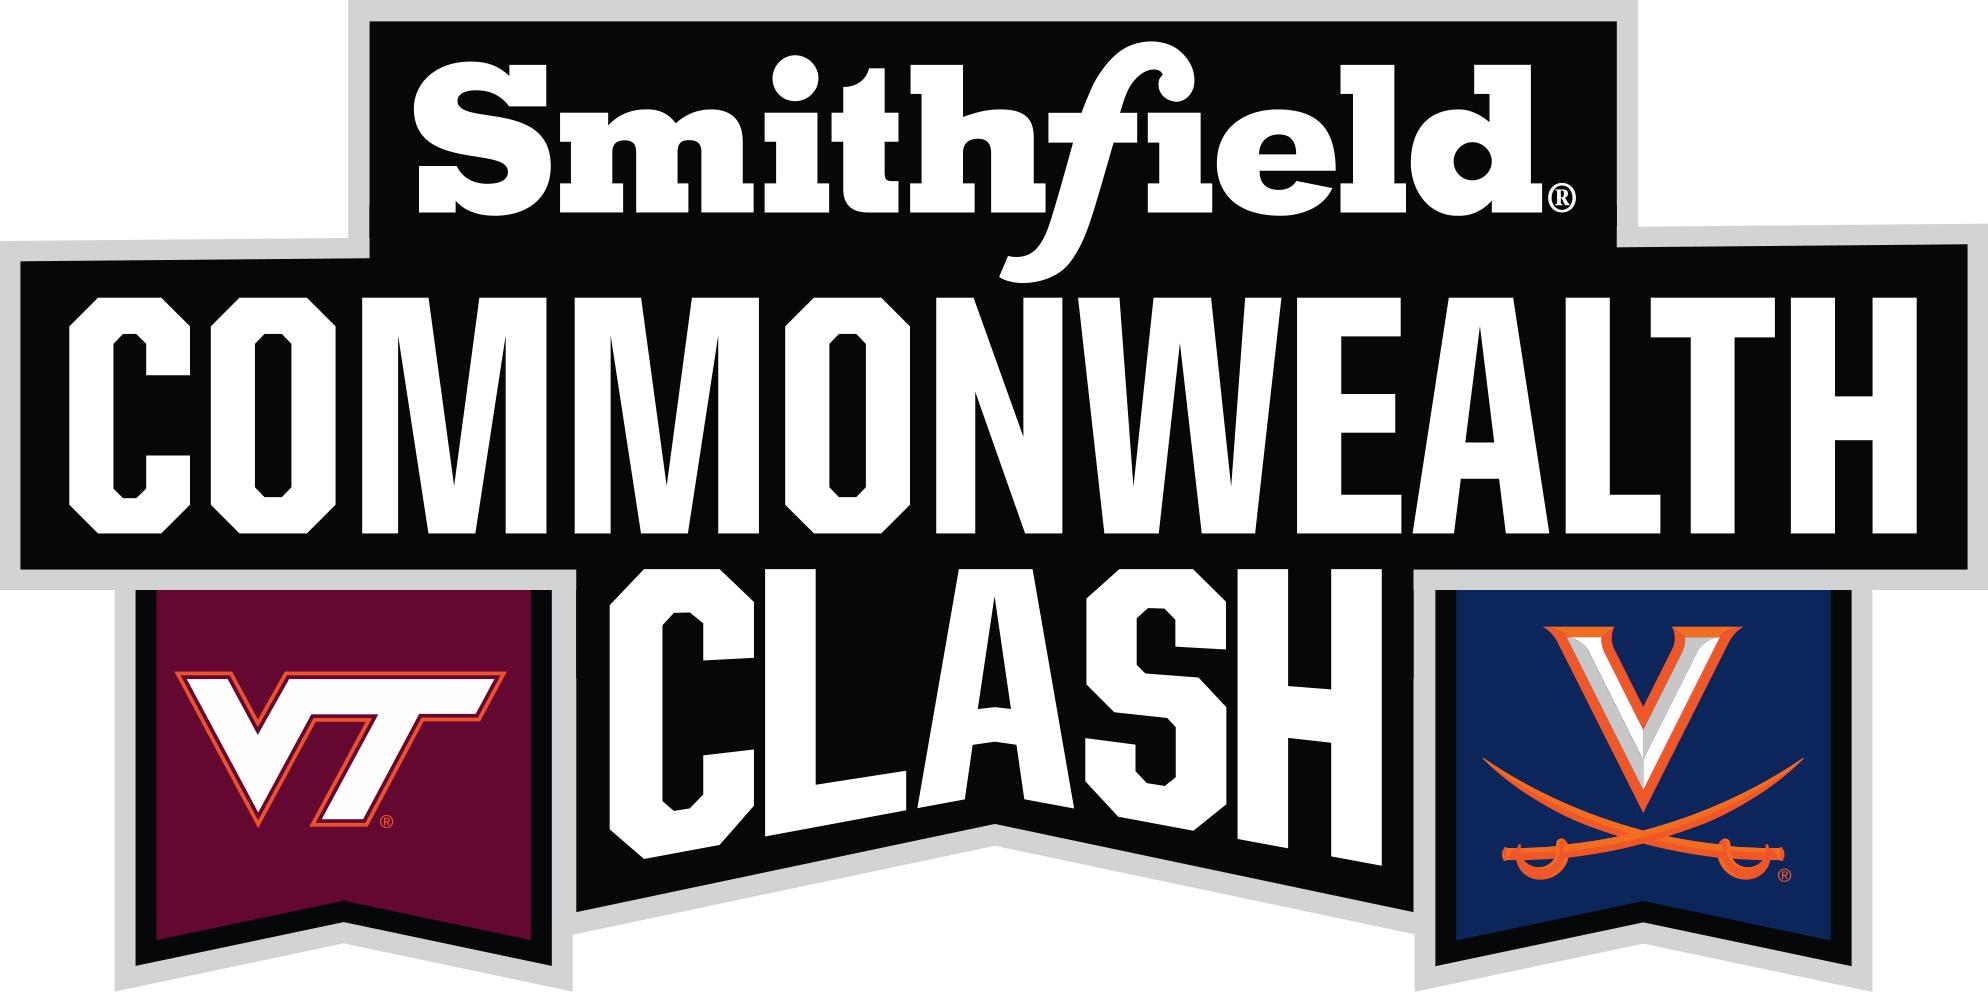 SMITHFIELD COMMONWEALTH CLASH ABOUT MORE THAN JUST SPORTS